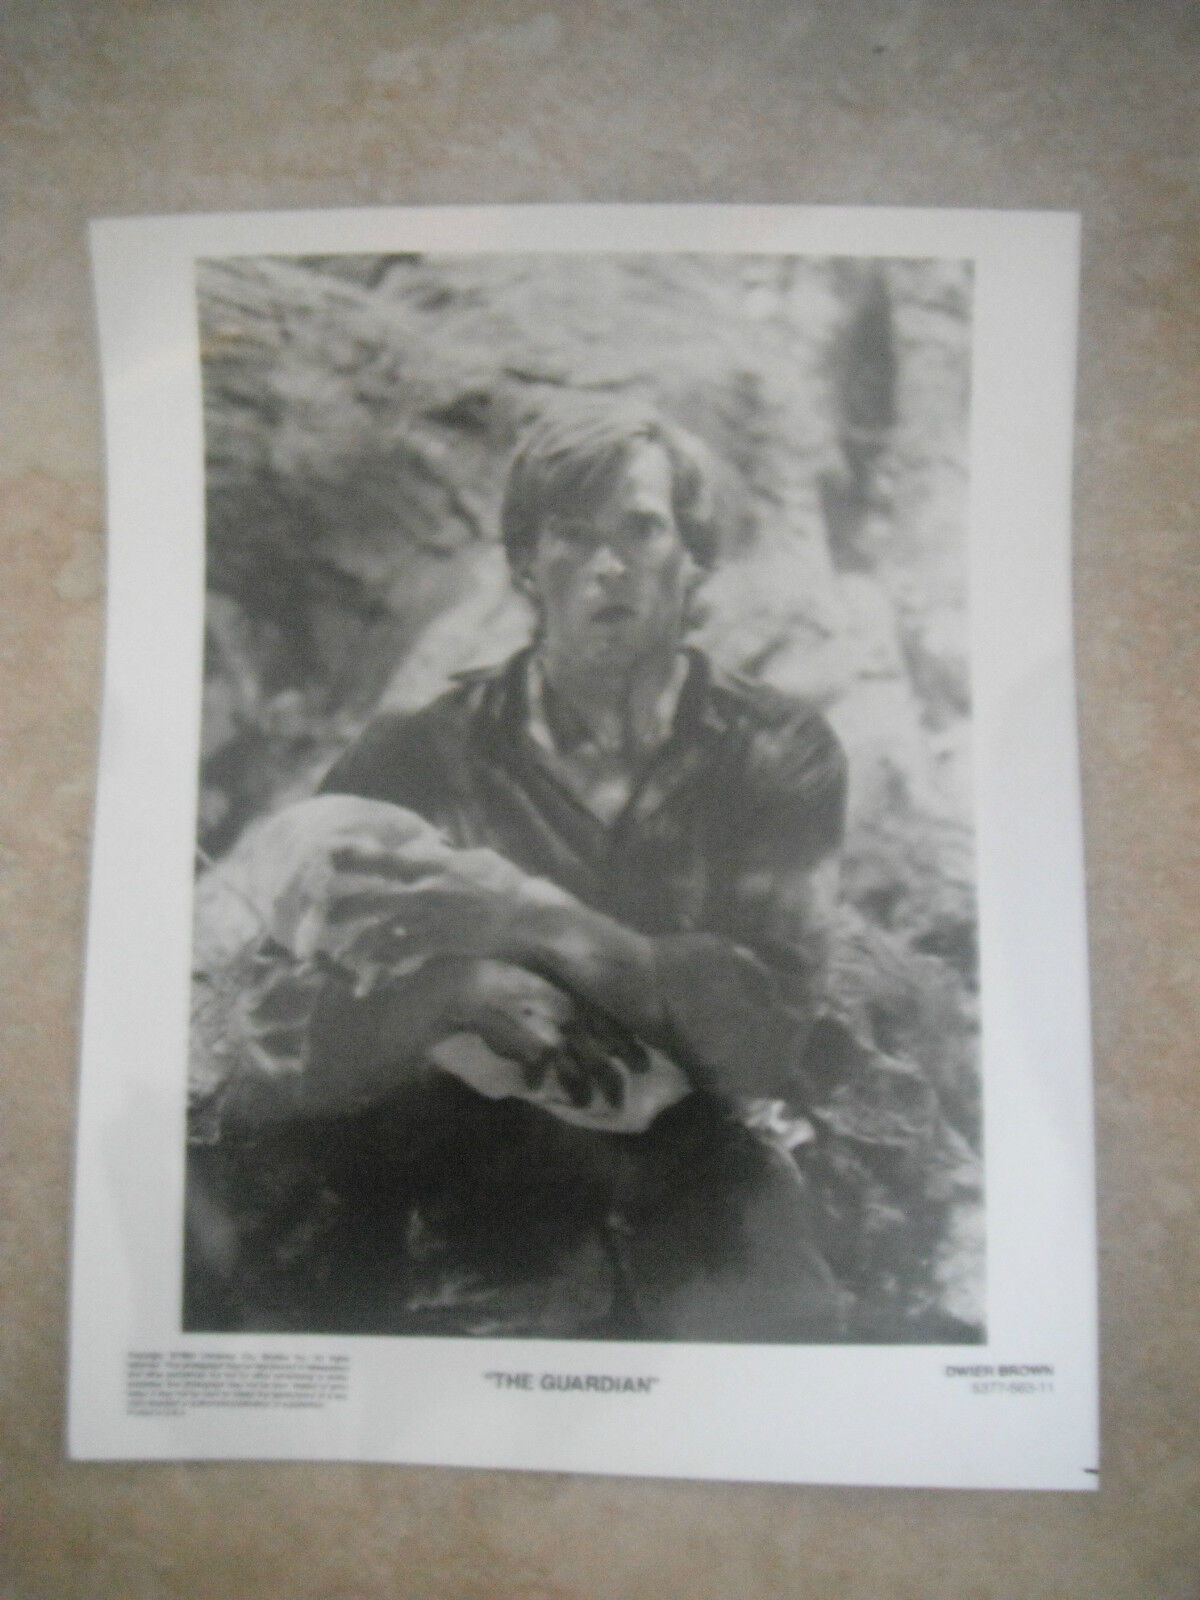 The Guardian 1980 Dwier Brown B&W 8x10 Promo Photo Poster painting Original Lobby Card